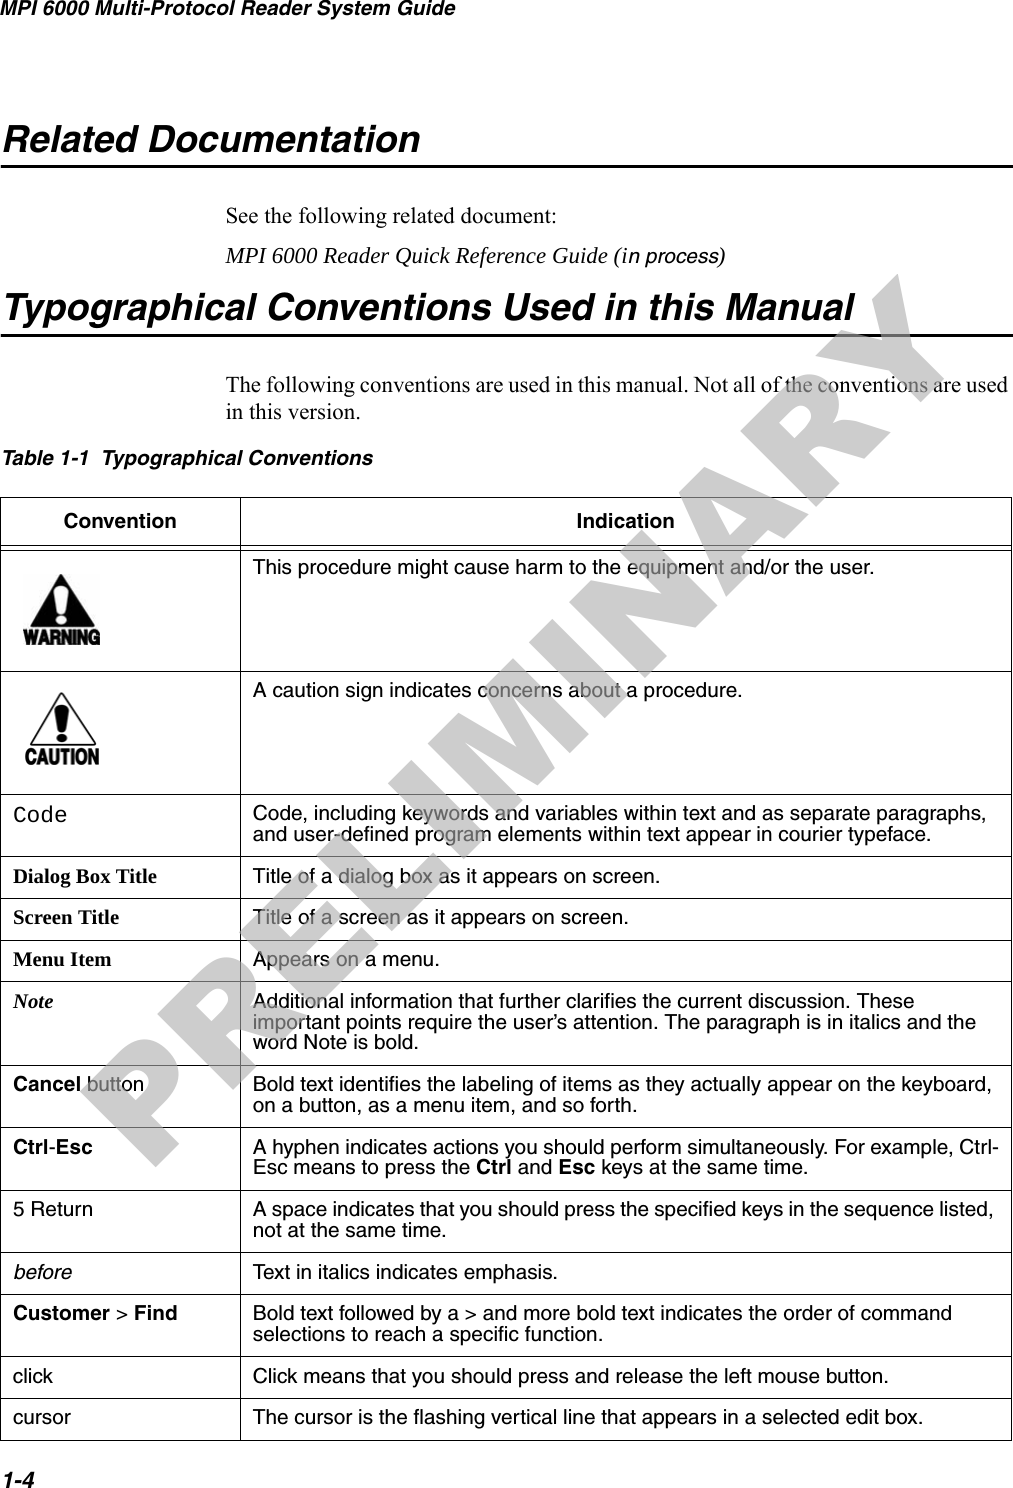 MPI 6000 Multi-Protocol Reader System Guide1-4Related DocumentationSee the following related document:MPI 6000 Reader Quick Reference Guide (in process)Typographical Conventions Used in this ManualThe following conventions are used in this manual. Not all of the conventions are used in this version.Table 1-1  Typographical Conventions Convention IndicationThis procedure might cause harm to the equipment and/or the user.A caution sign indicates concerns about a procedure.Code Code, including keywords and variables within text and as separate paragraphs, and user-defined program elements within text appear in courier typeface.Dialog Box Title Title of a dialog box as it appears on screen.Screen Title Title of a screen as it appears on screen.Menu Item Appears on a menu.Note Additional information that further clarifies the current discussion. These important points require the user’s attention. The paragraph is in italics and the word Note is bold.Cancel button Bold text identifies the labeling of items as they actually appear on the keyboard, on a button, as a menu item, and so forth.Ctrl-Esc A hyphen indicates actions you should perform simultaneously. For example, Ctrl-Esc means to press the Ctrl and Esc keys at the same time.5 Return A space indicates that you should press the specified keys in the sequence listed, not at the same time.before Text in italics indicates emphasis.Customer &gt; Find Bold text followed by a &gt; and more bold text indicates the order of command selections to reach a specific function. click Click means that you should press and release the left mouse button.cursor The cursor is the flashing vertical line that appears in a selected edit box.PRELIMINARY